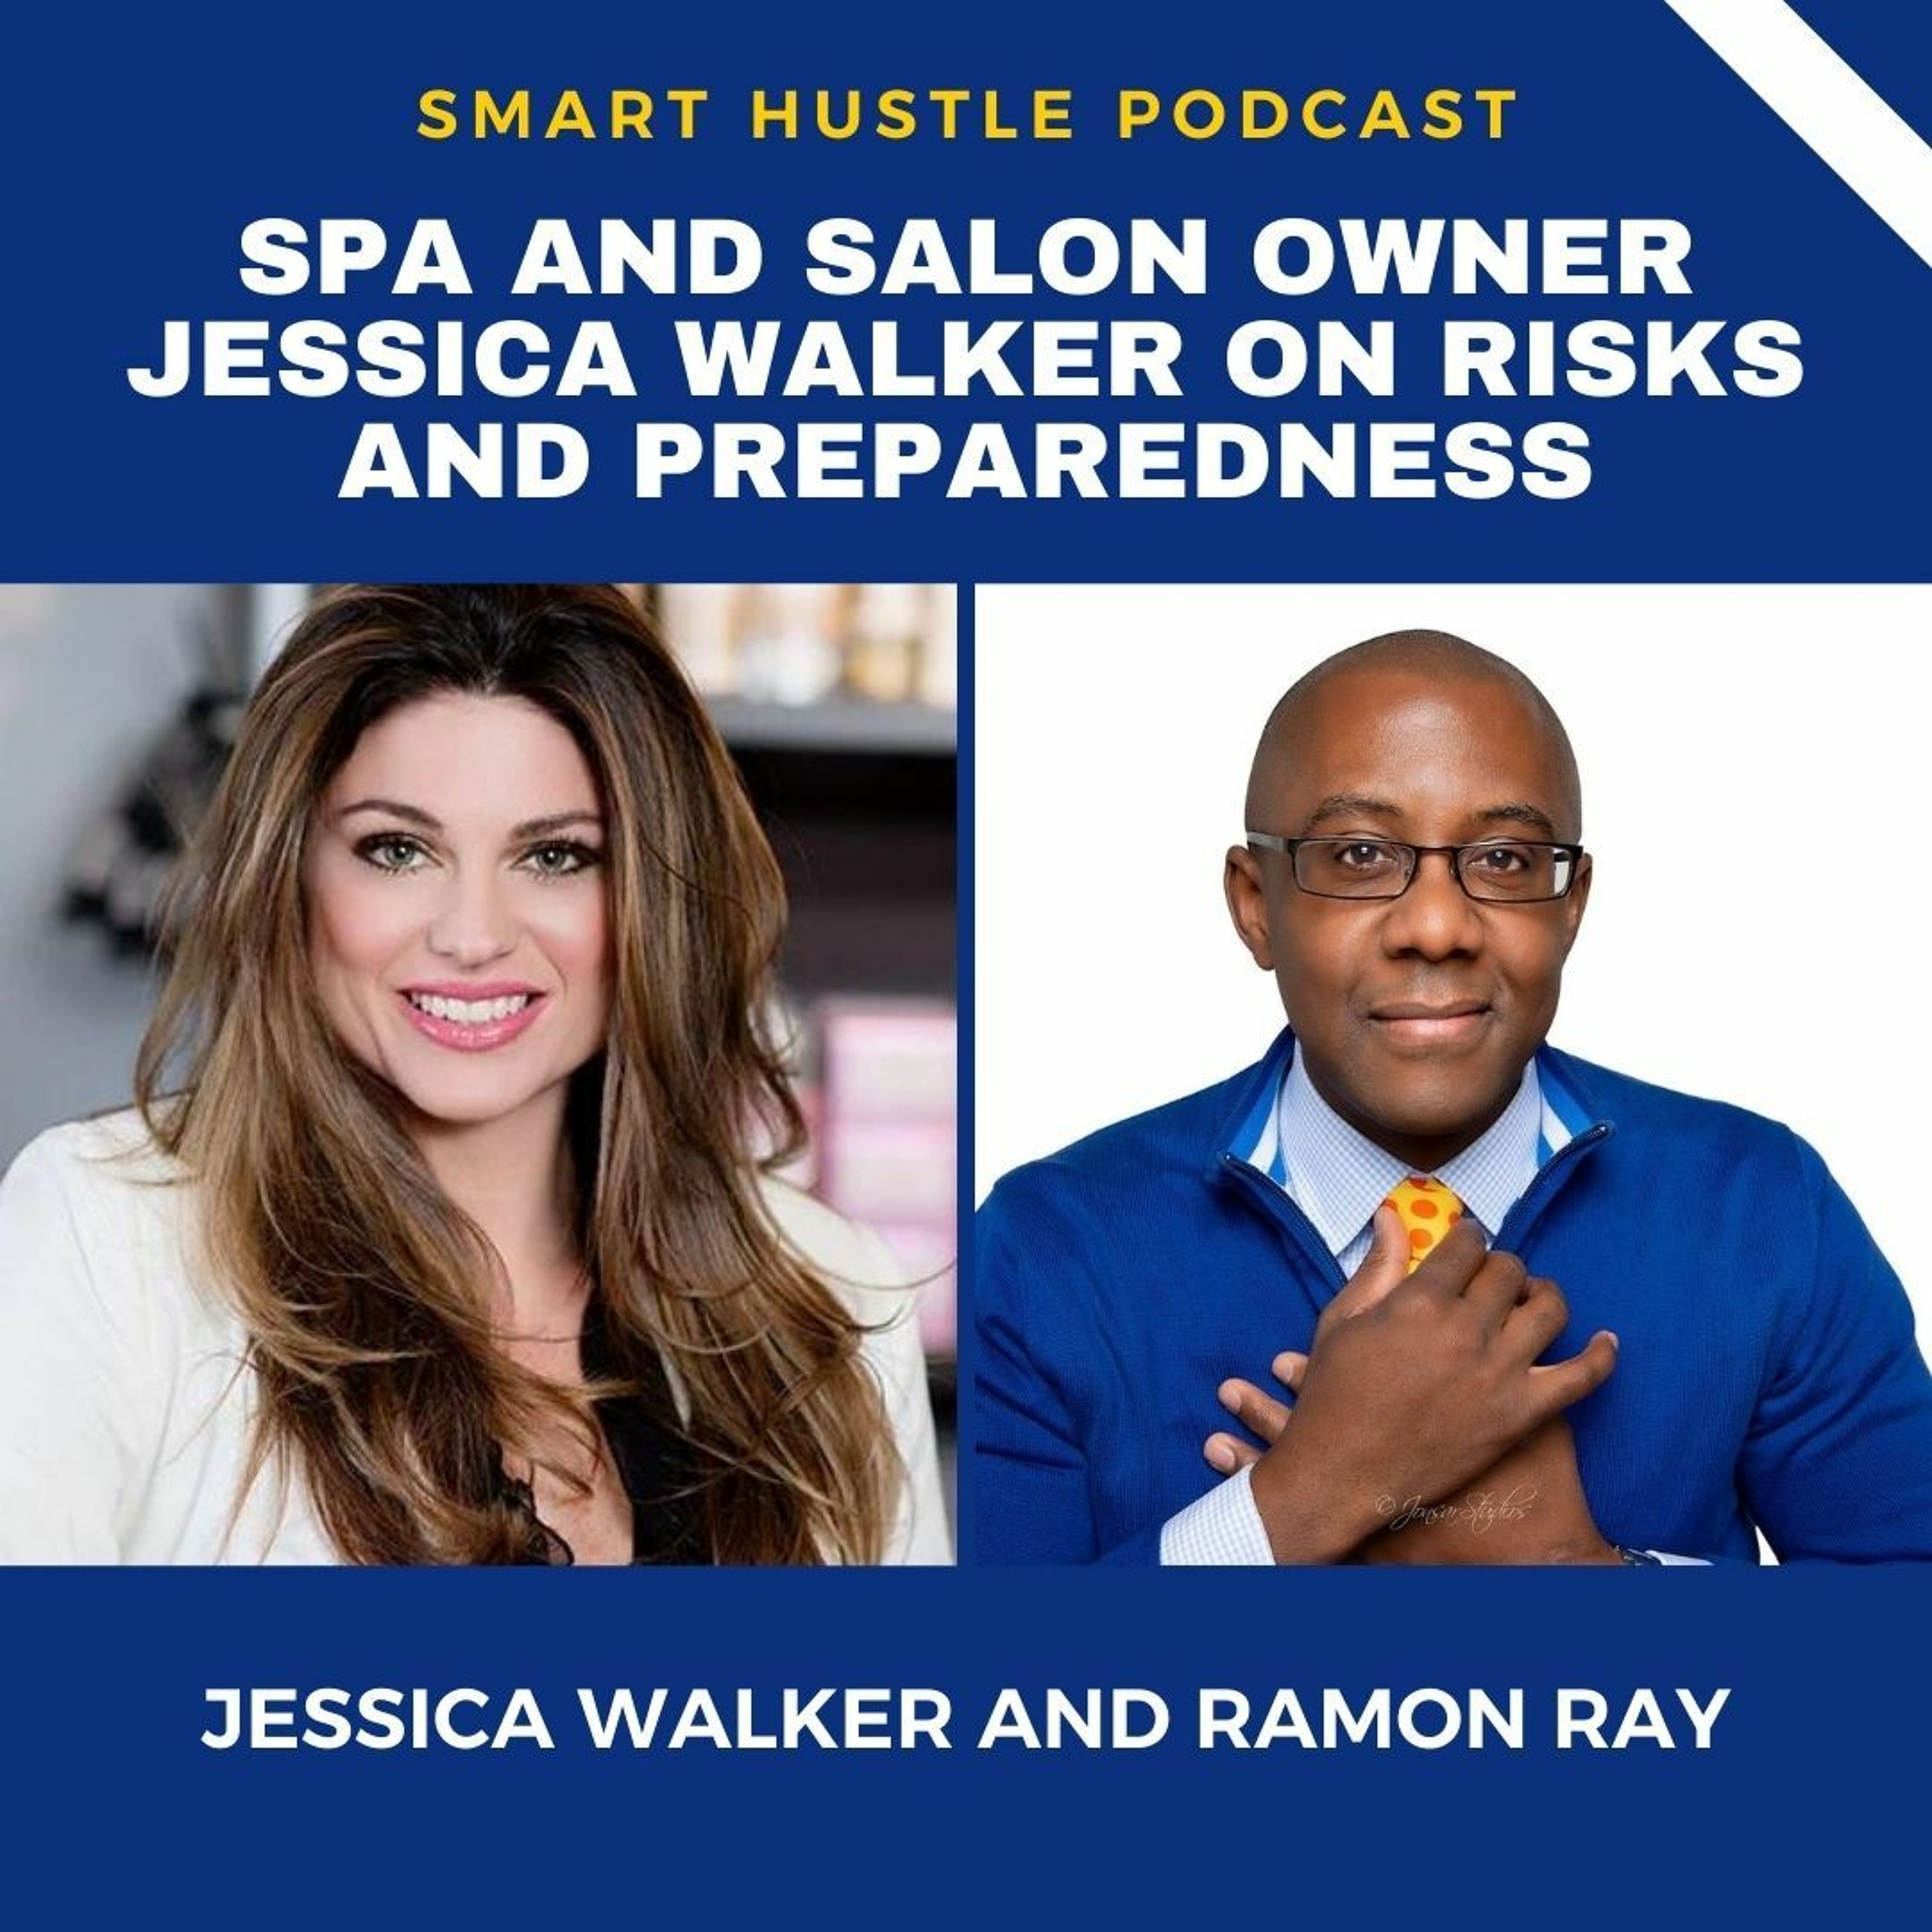 Spa and Salon Owner Jessica Walker Lives Prepared and Takes Risks